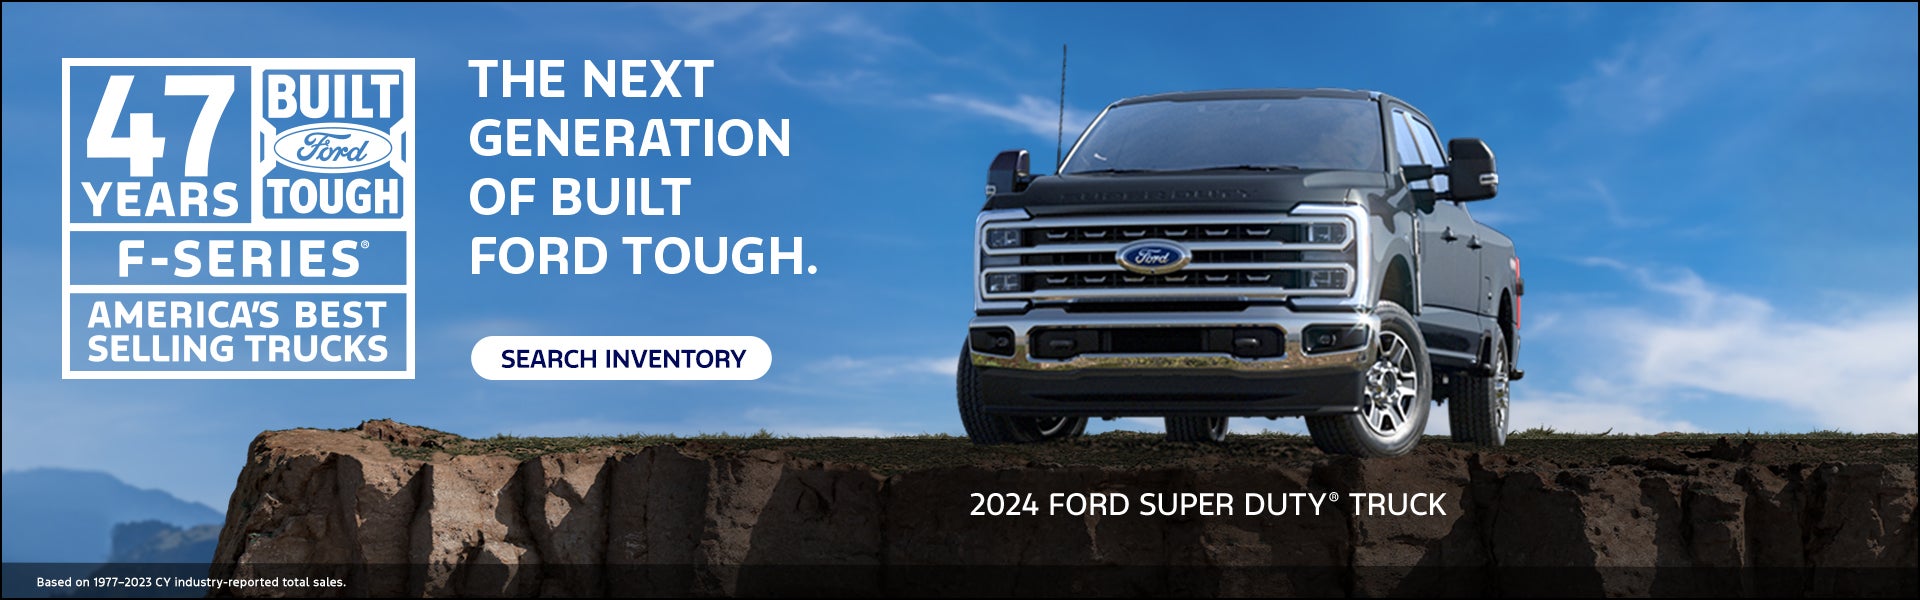 2024 Ford Super Duty Truck